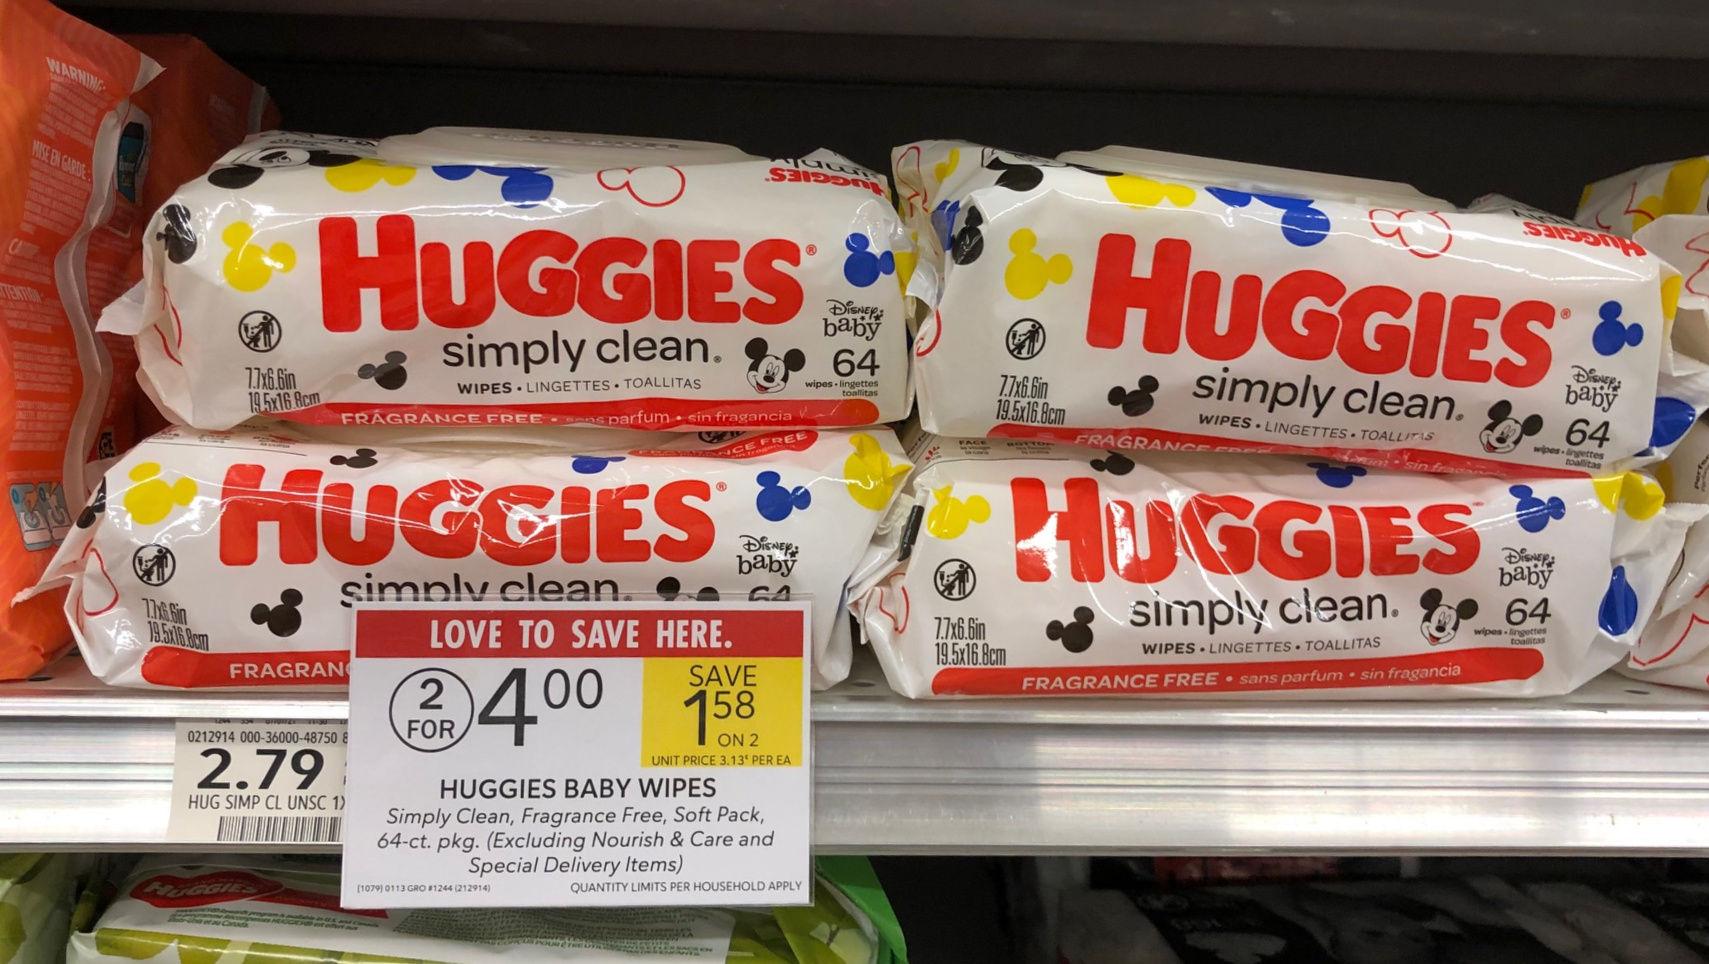 Huggies Wipes As Low As $1.50 Per Pack At Publix on I Heart Publix